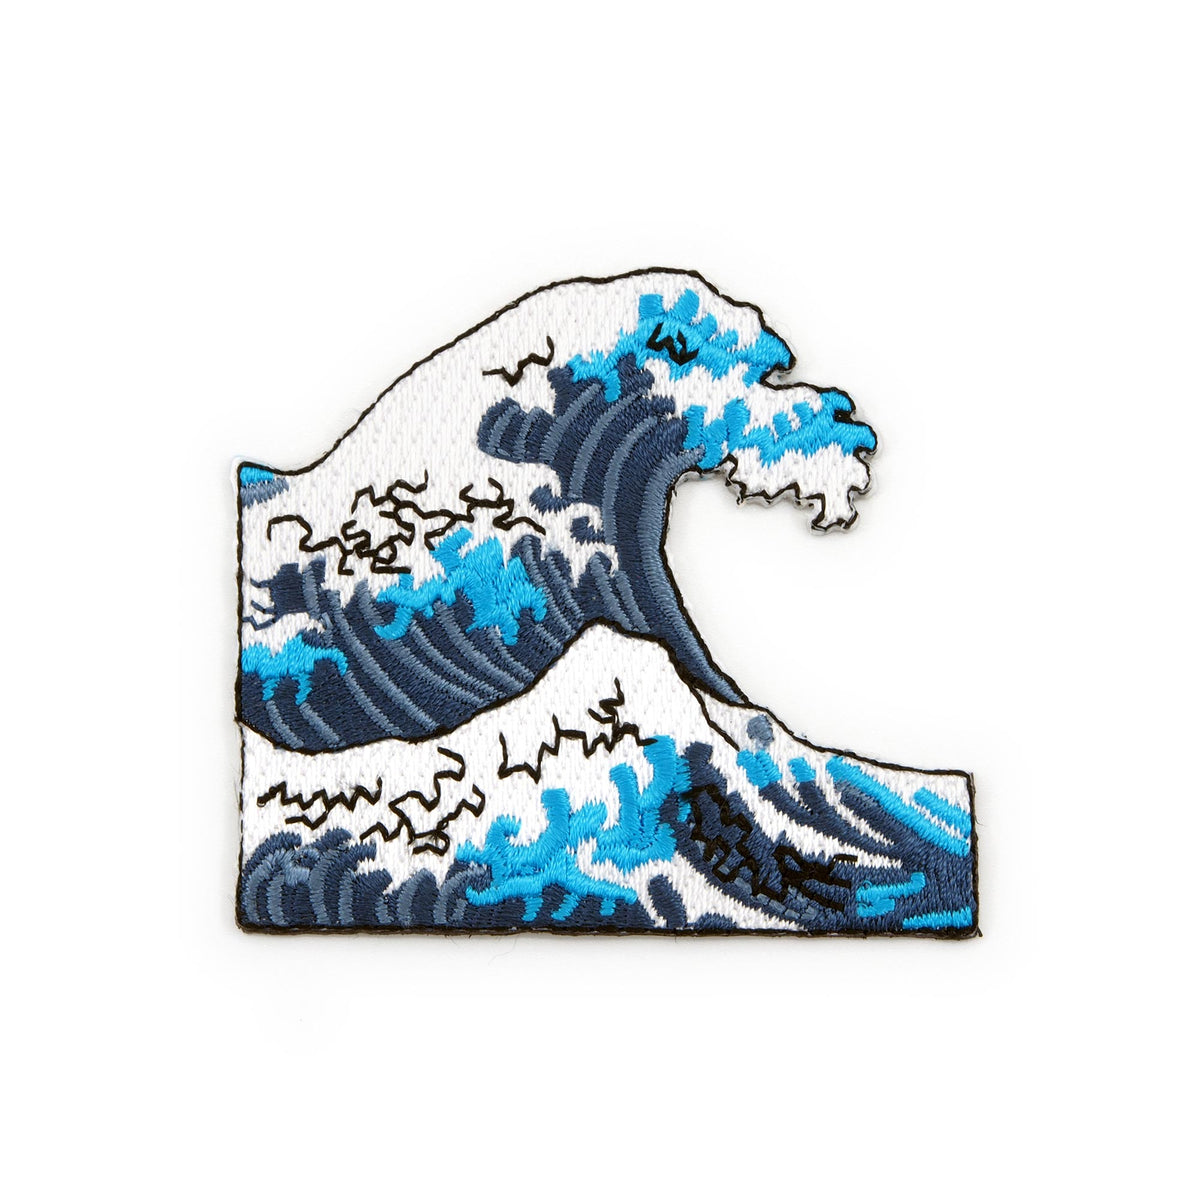 Great Ocean Wave embroidered iron-on patch